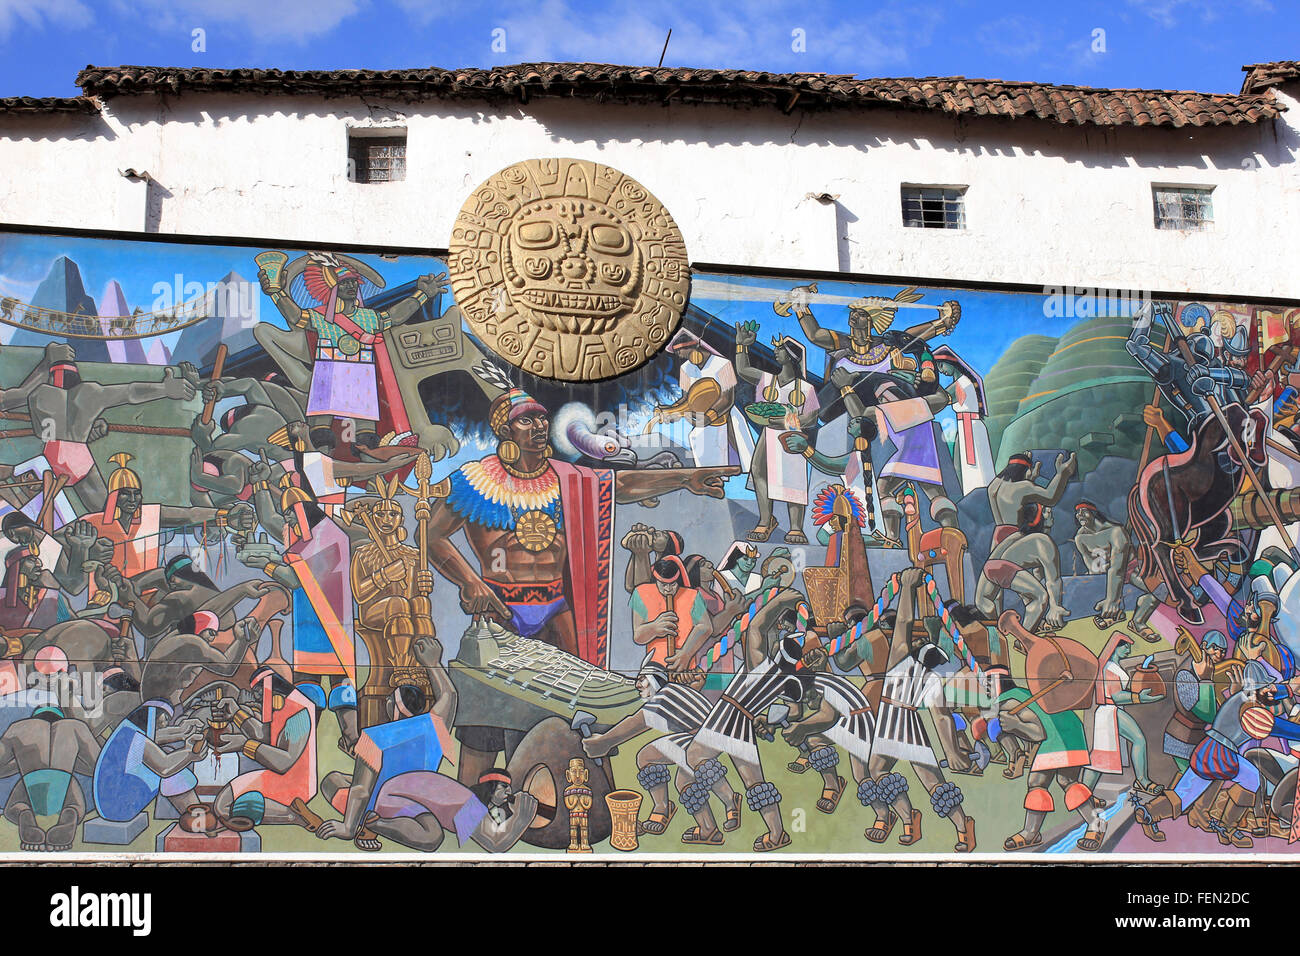 Part Of The Mural In Cusco By Juan Bravo Depicting Events In The Inca Civilization Stock Photo